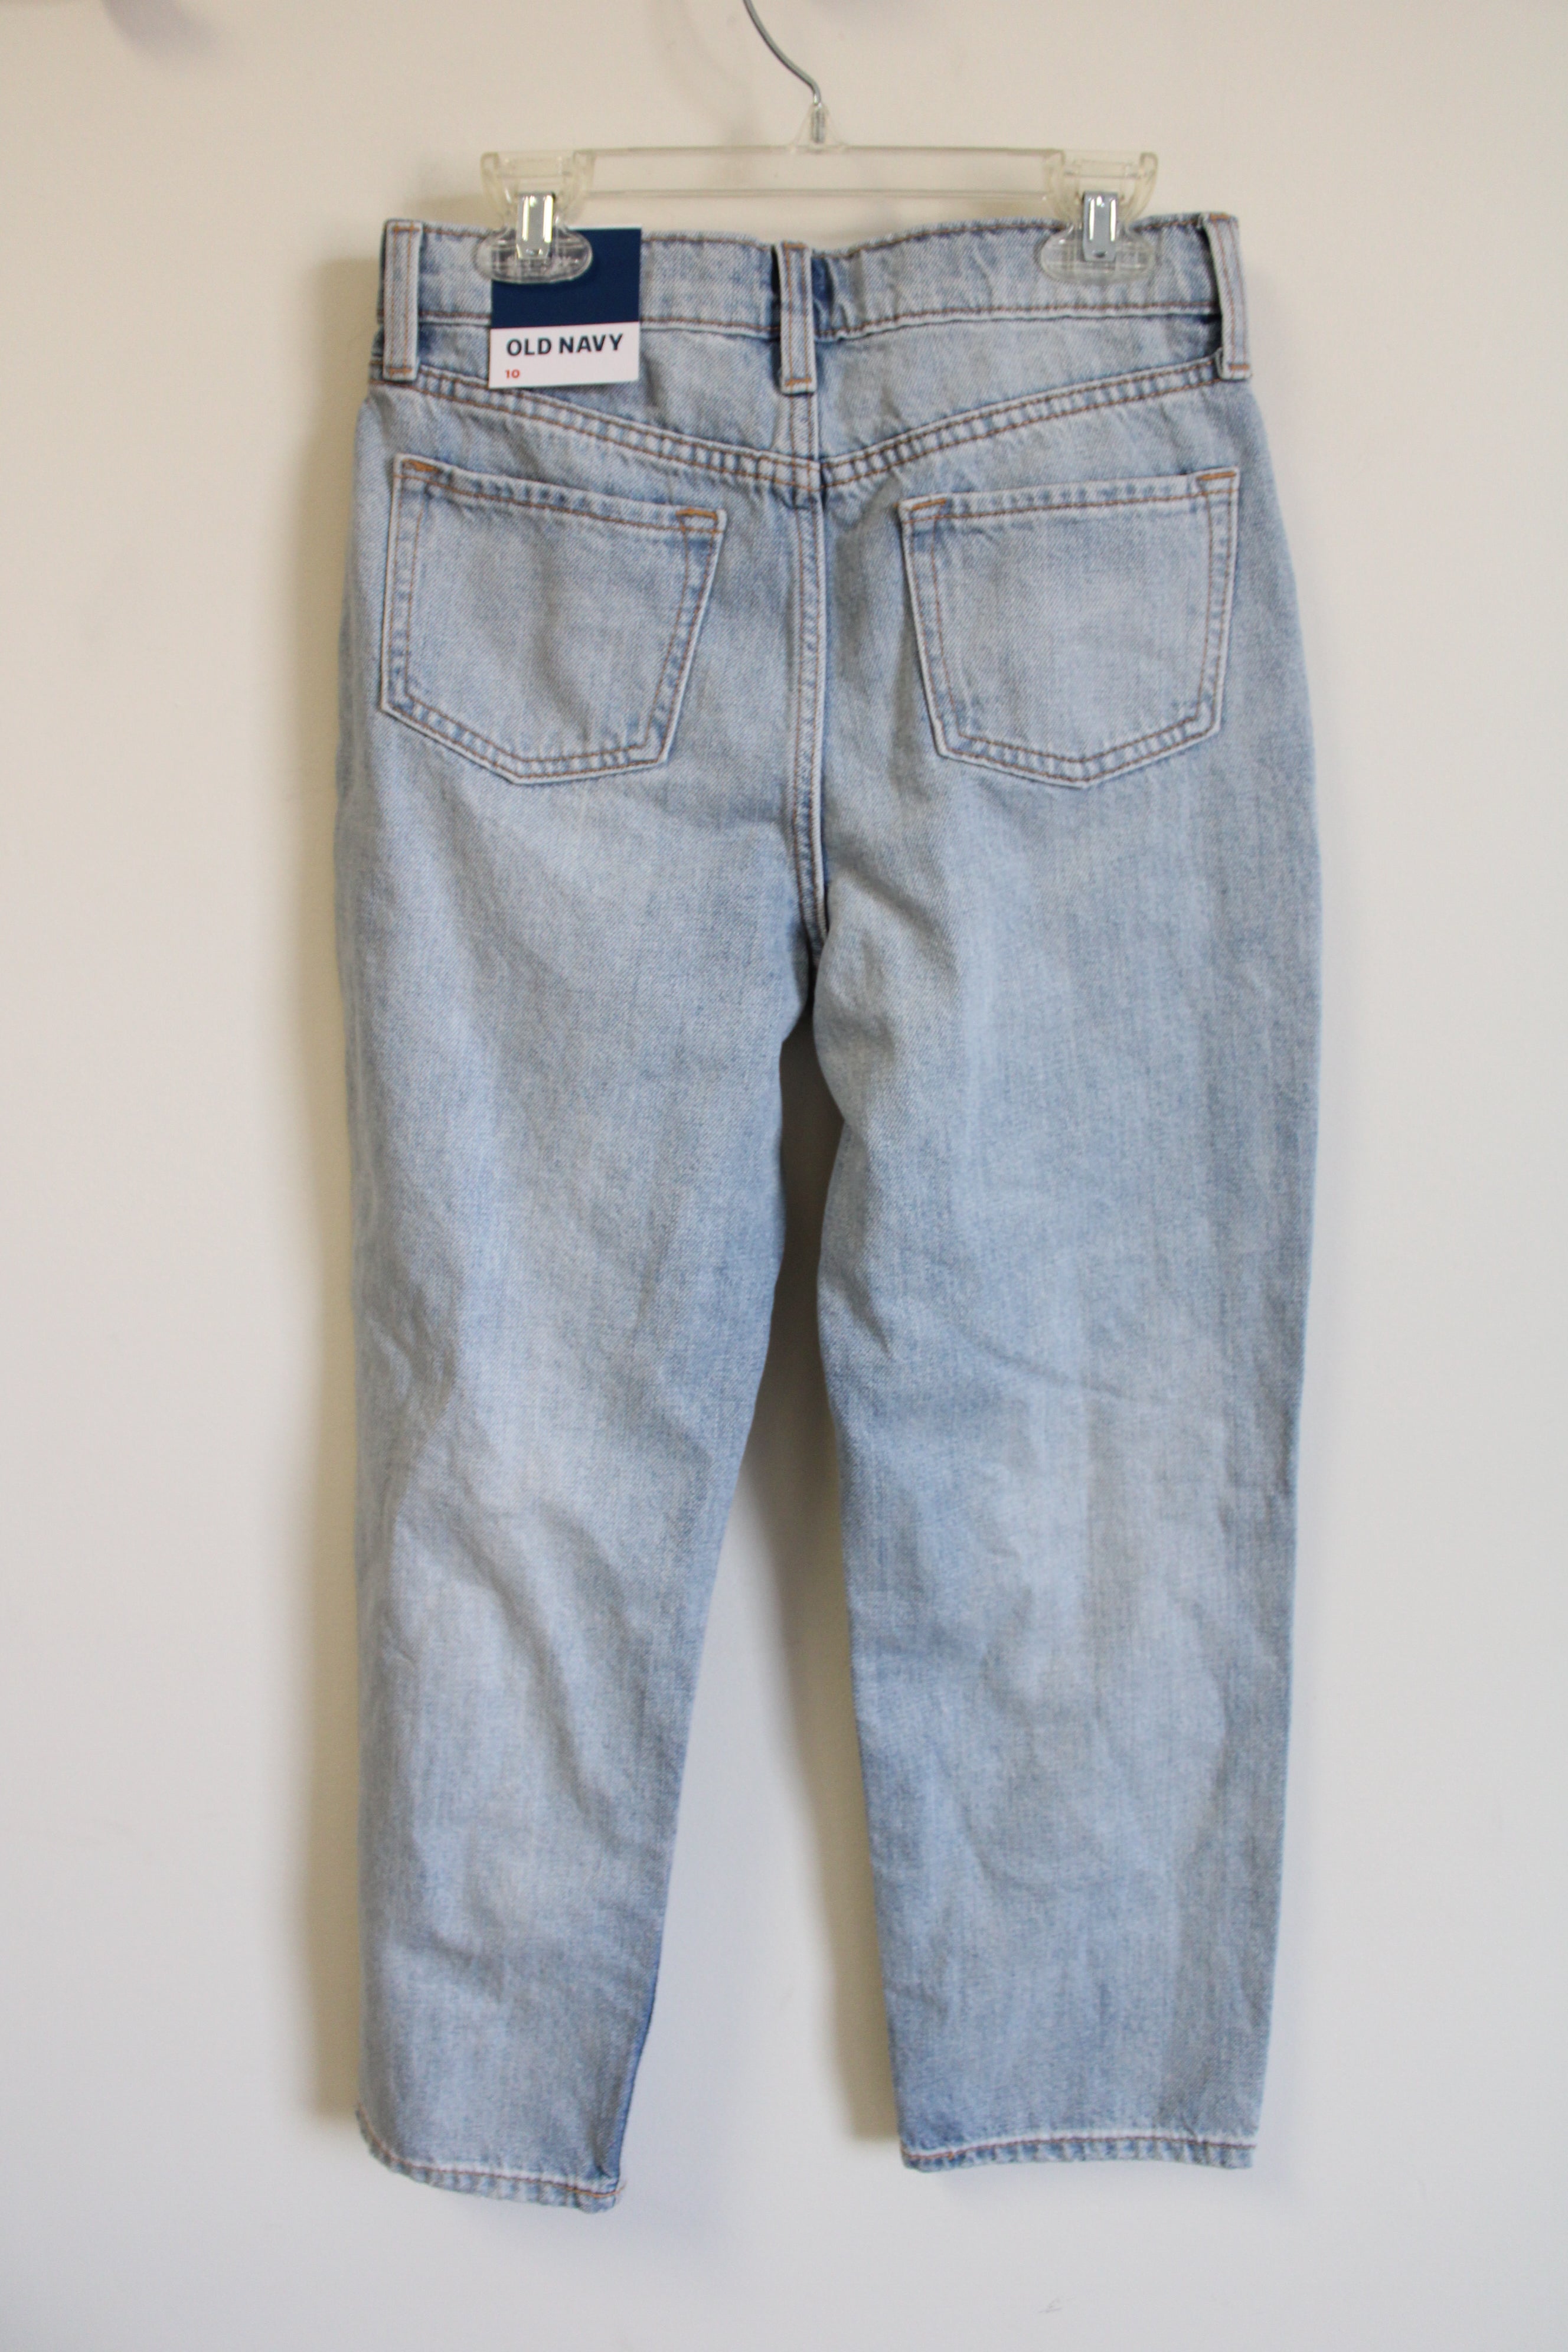 NEW Old Navy high Rise Slouchy Straight Jeans | 10